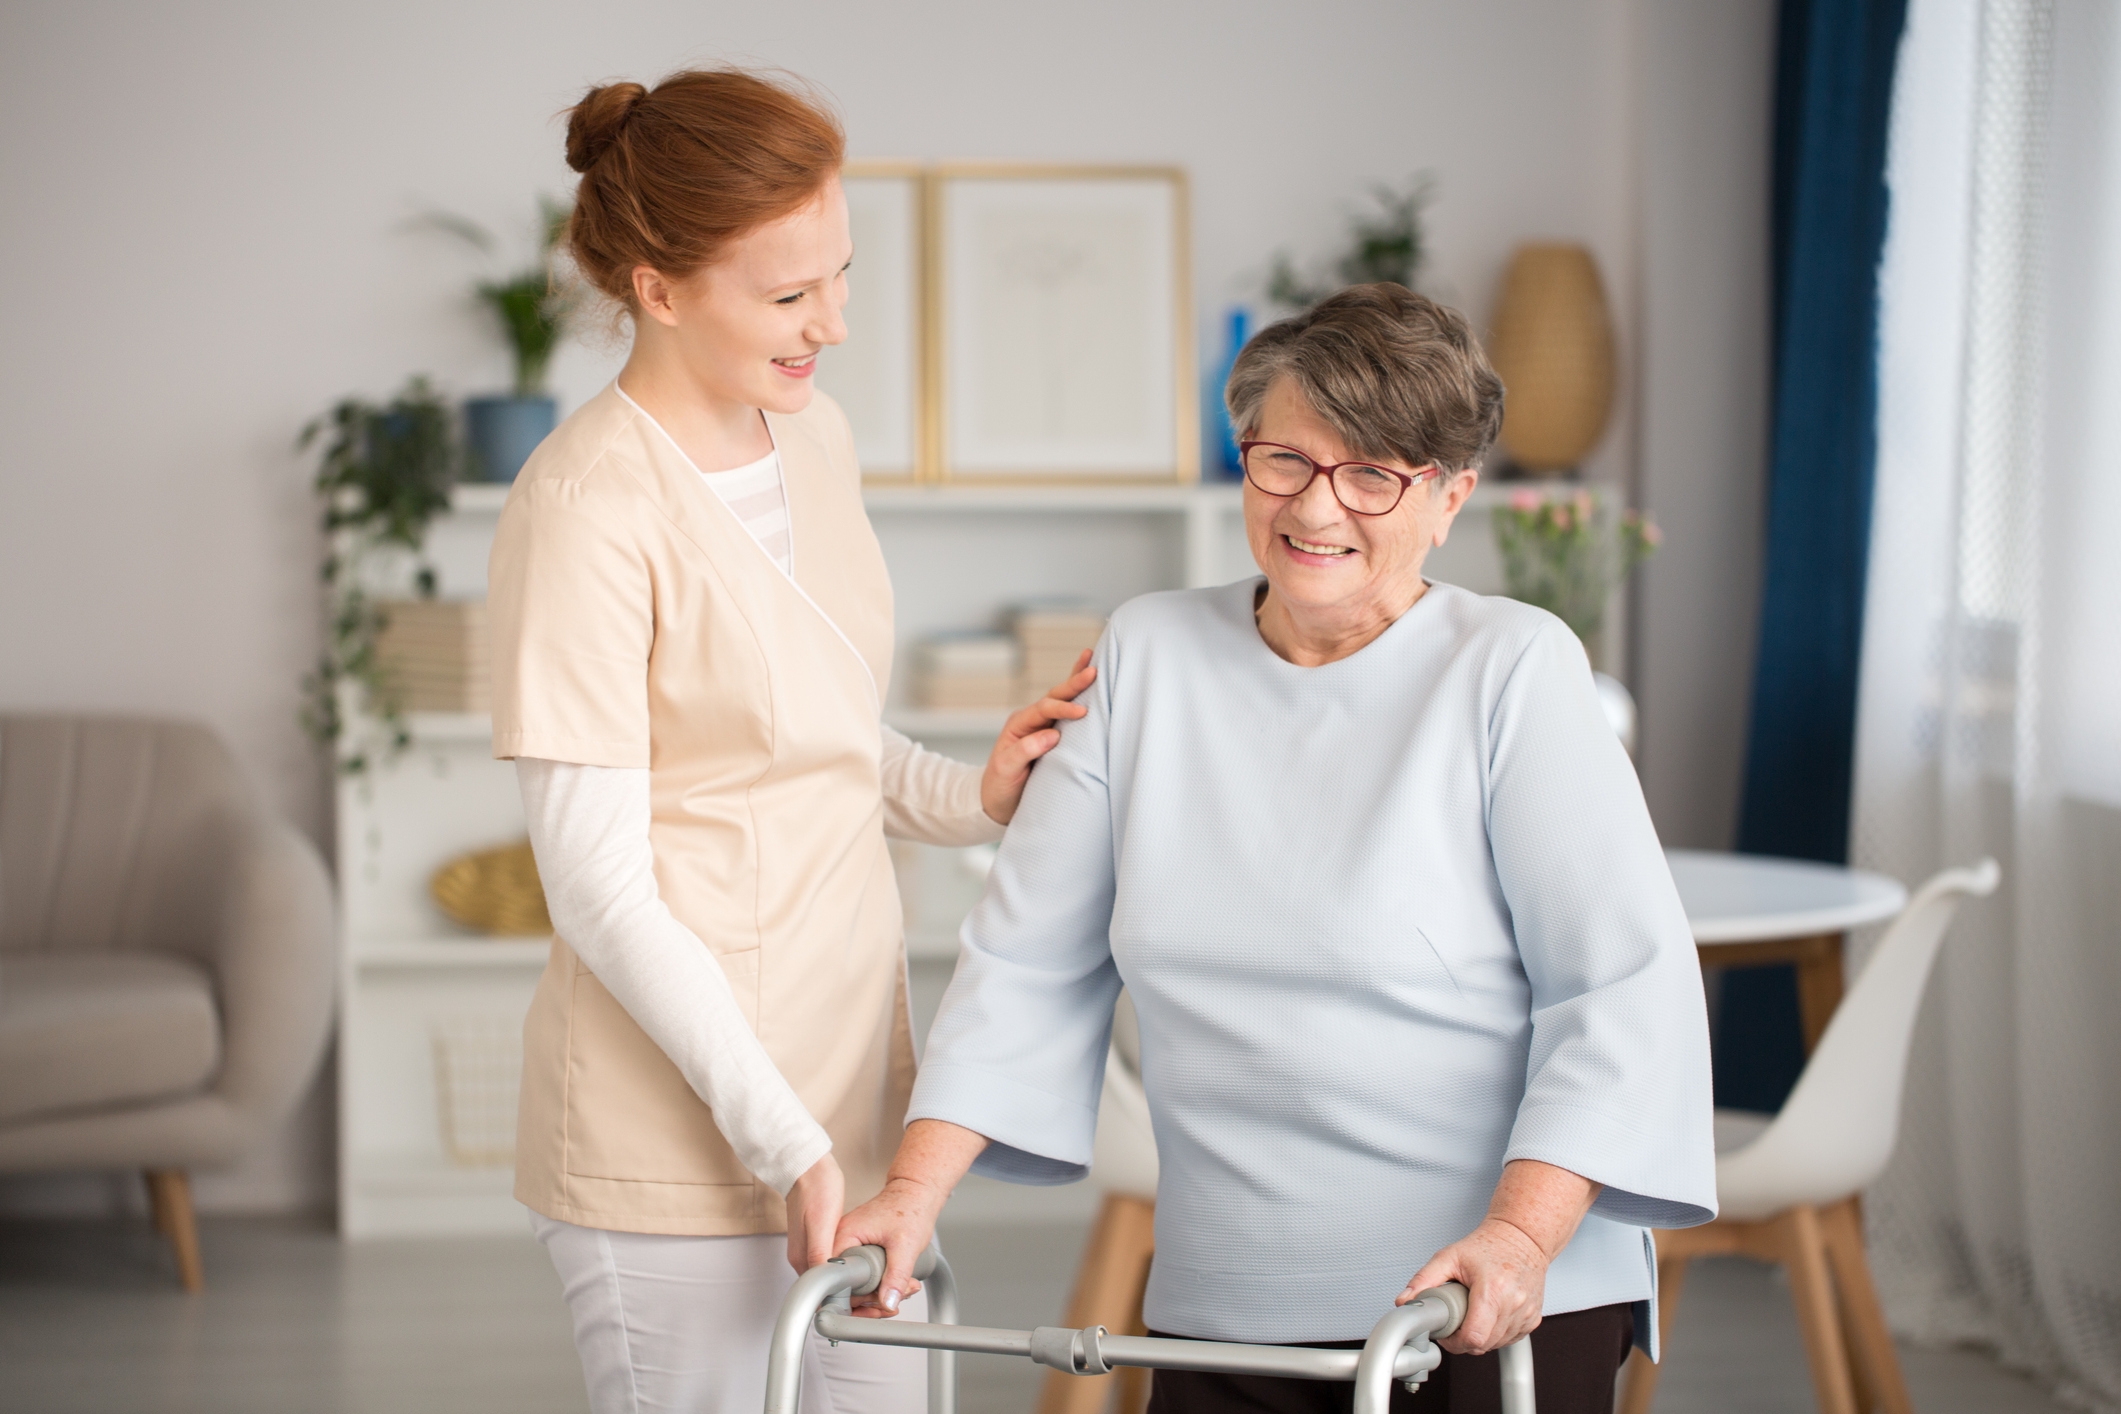 Your Choice Home Health Care - Reno, NV image